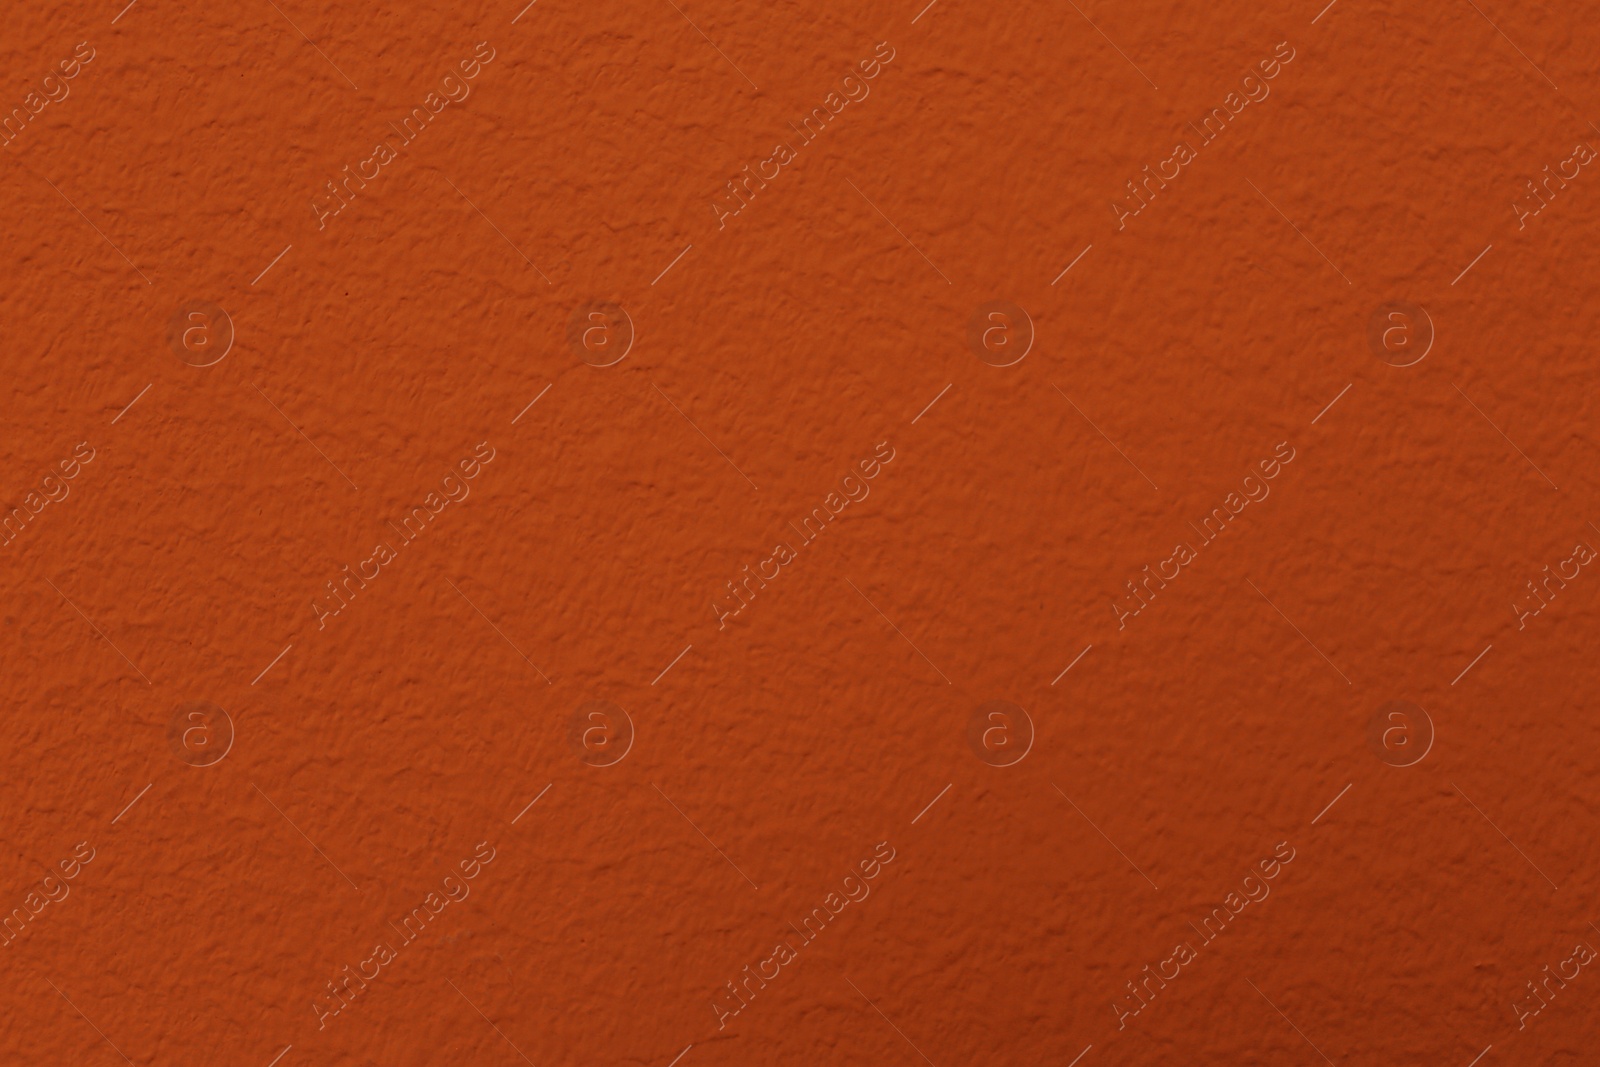 Photo of Orange textured surface as background, closeup view